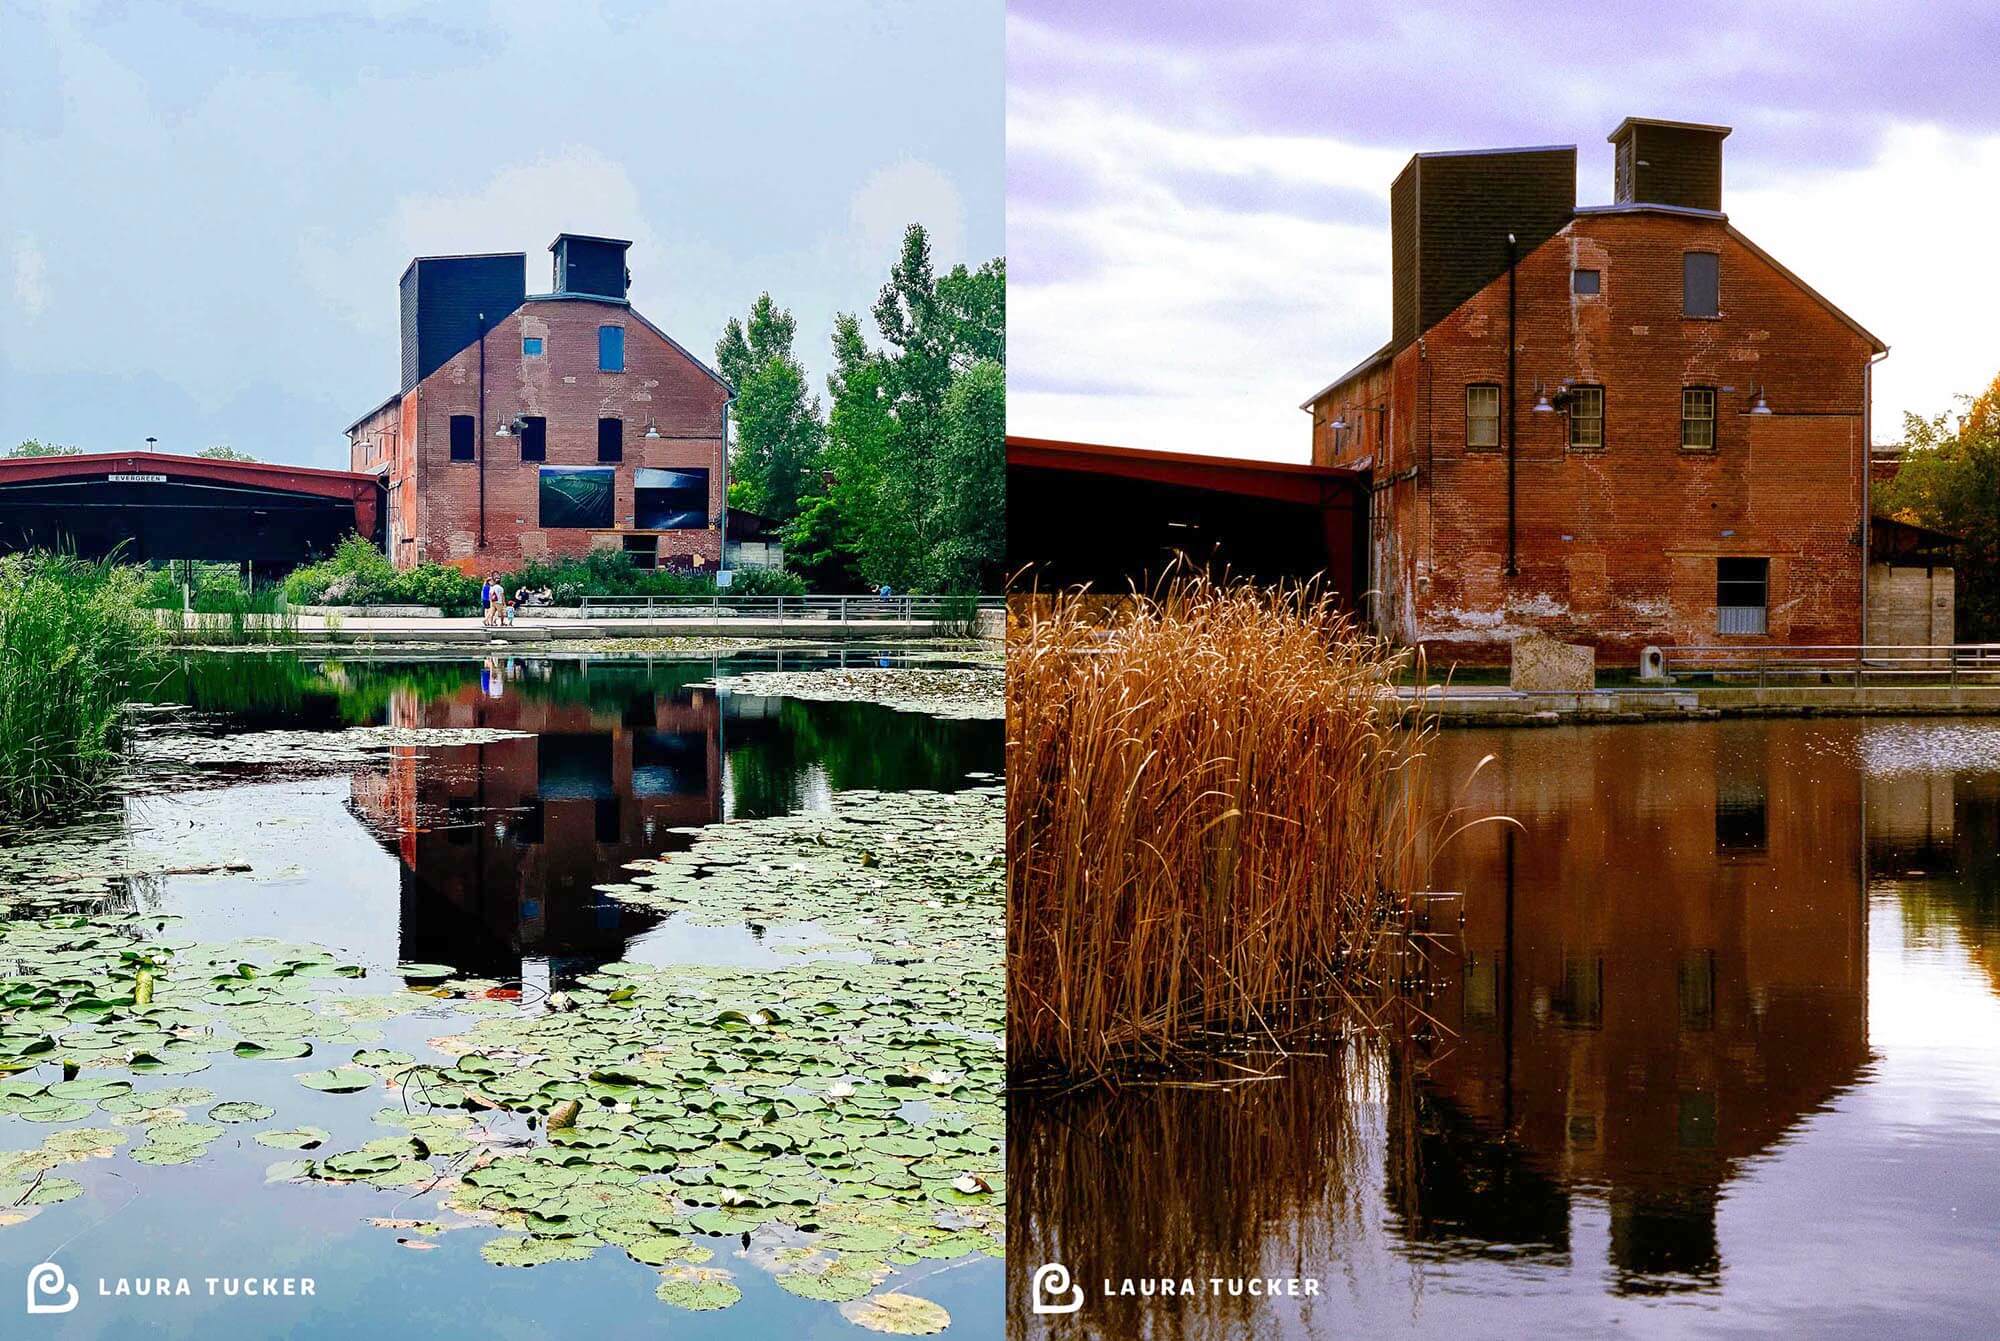 Side by side photos of Evergreen Brick Works in 2021 and 2003